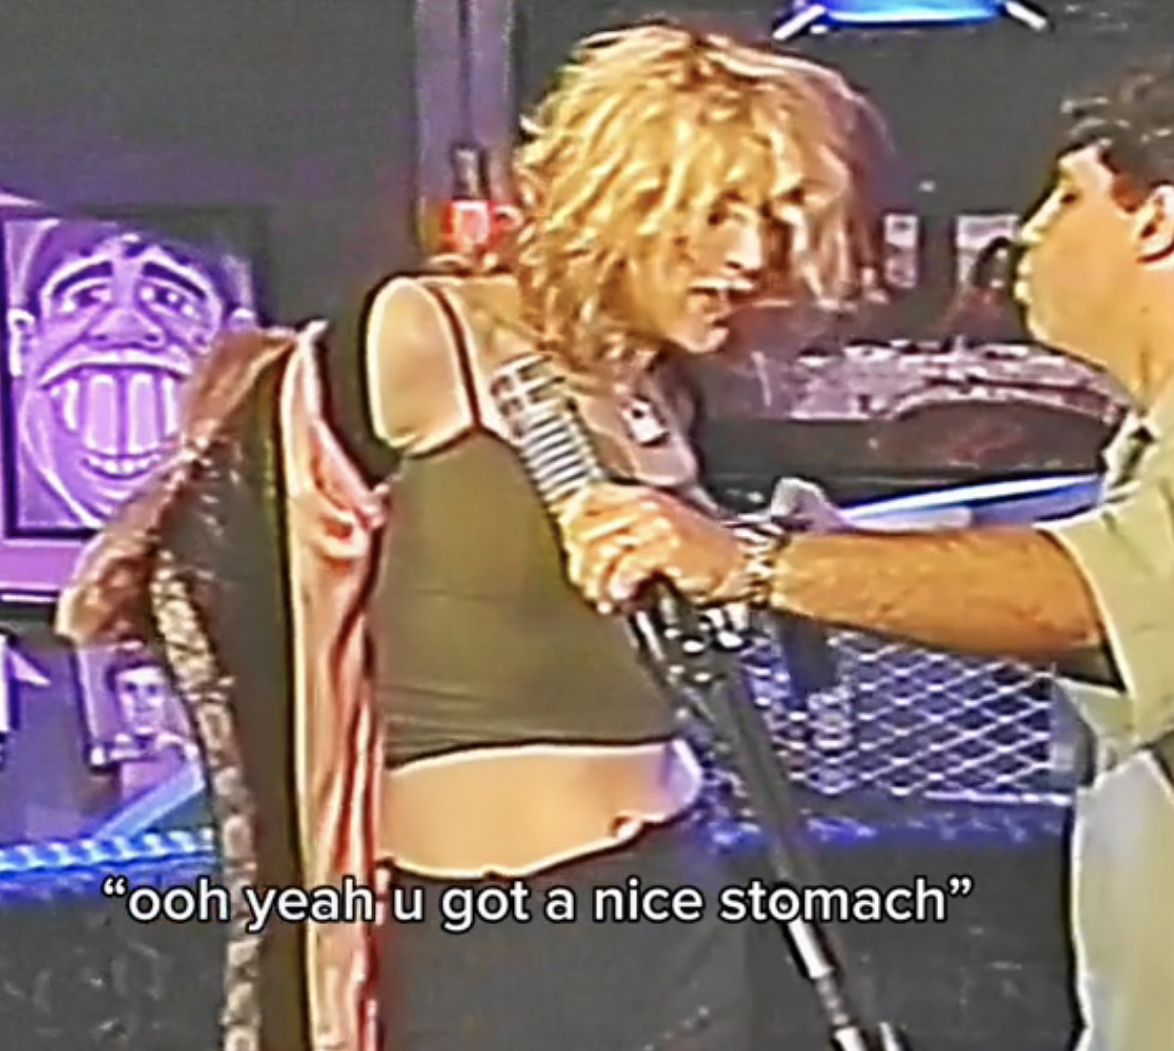 Courtney Love removing her jacket